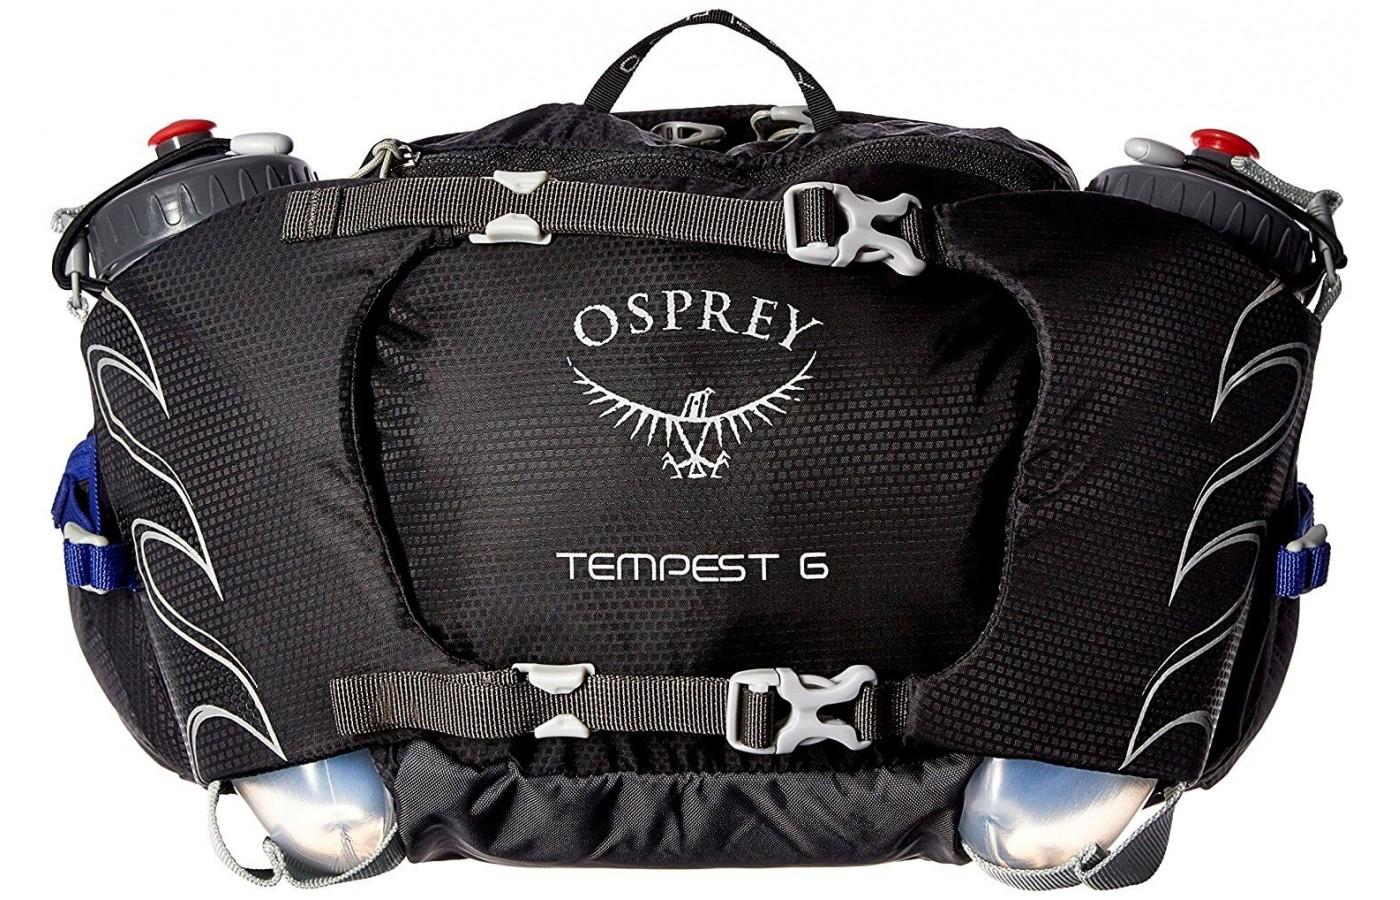 Osprey Tempest 6 is economic pack for long runs